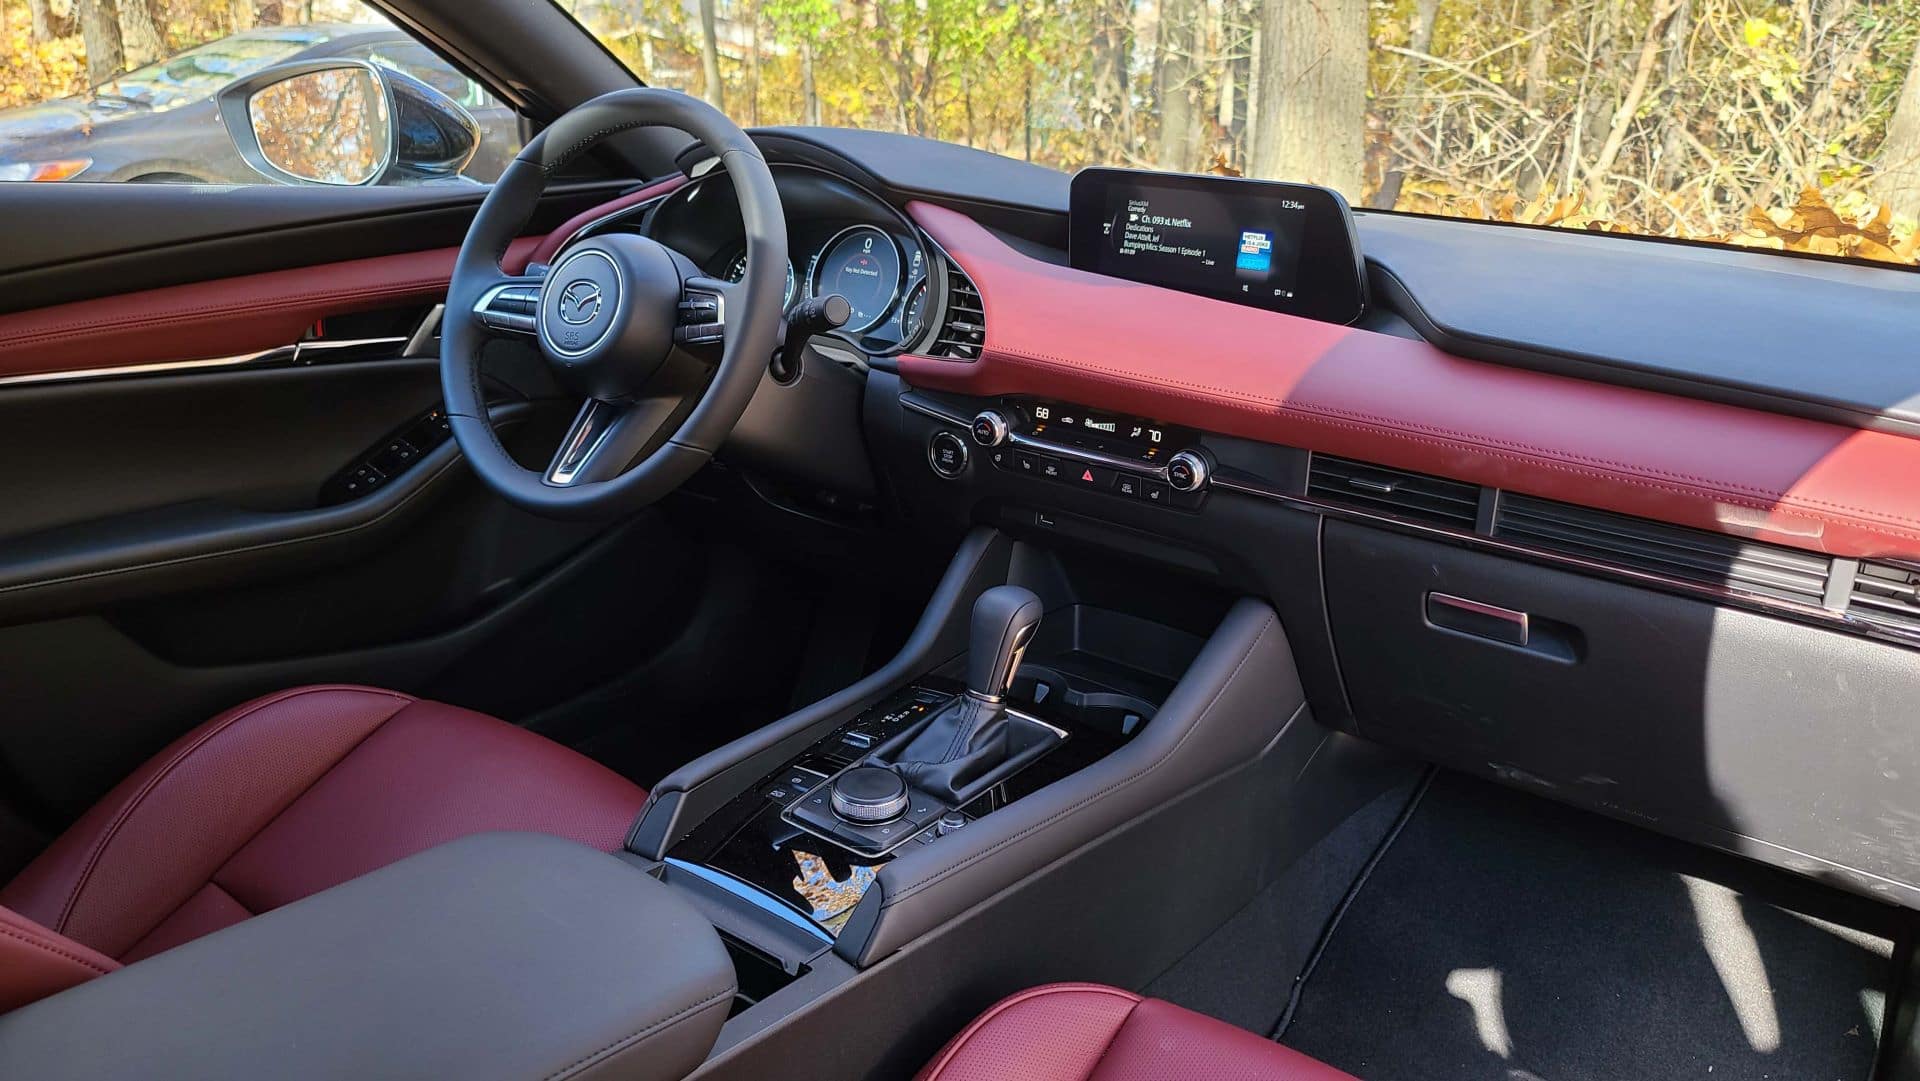 Autotrader Names 2021 Mazda3 a Top 10 Best Interior for 2021 | Smail Mazda